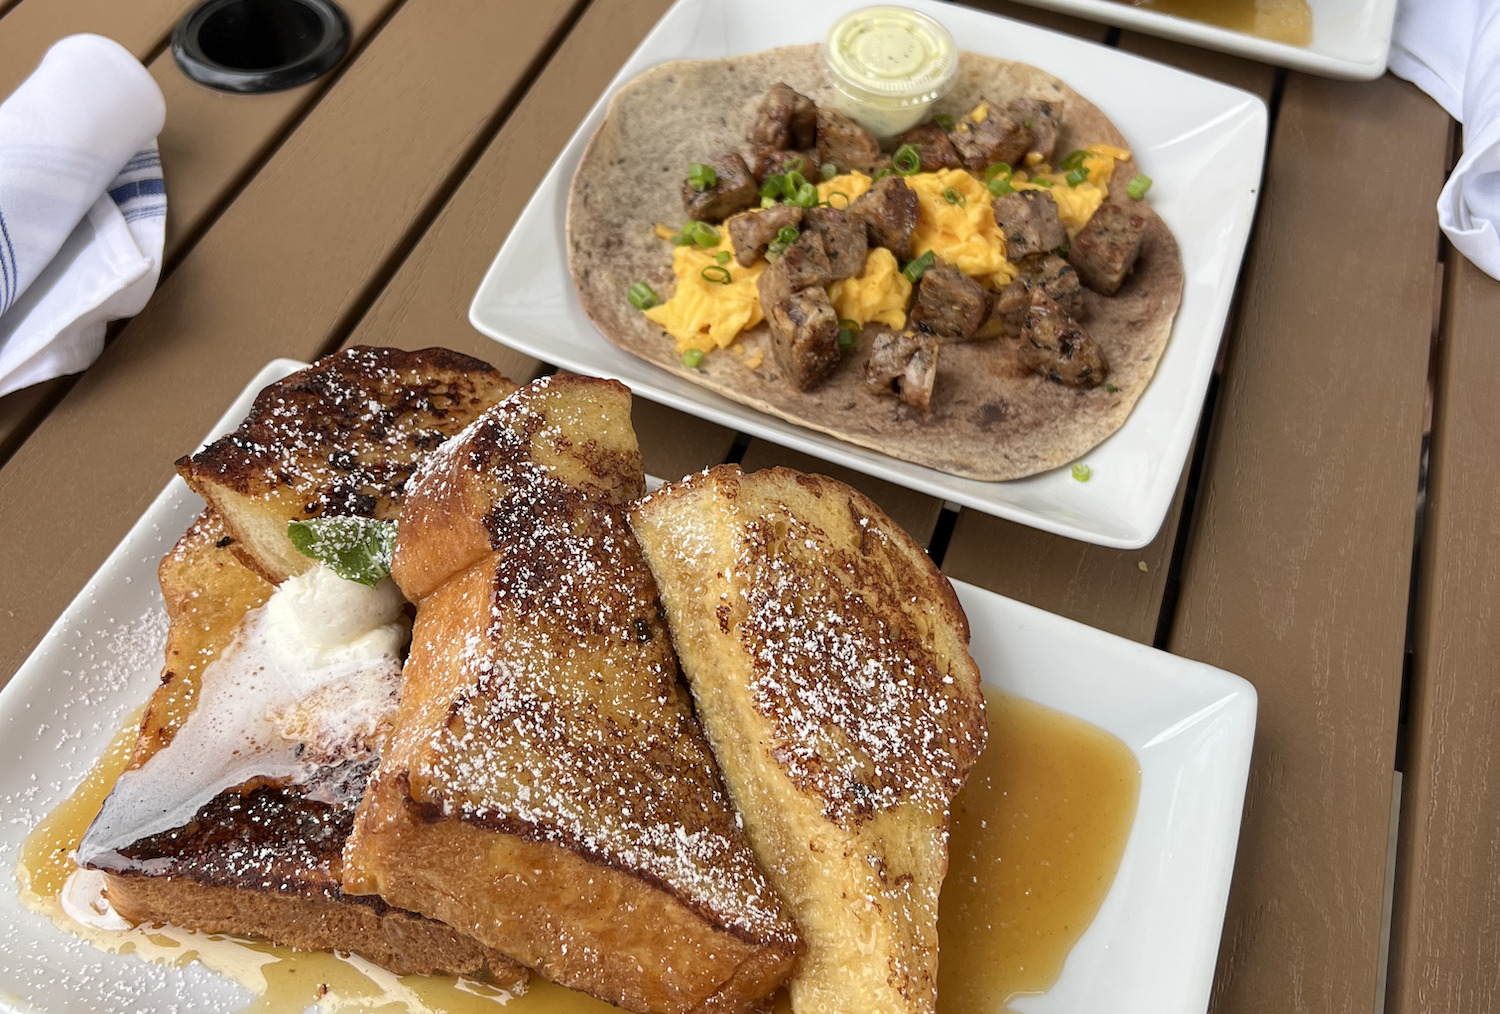 French toast and breakfast taco opened on a plate